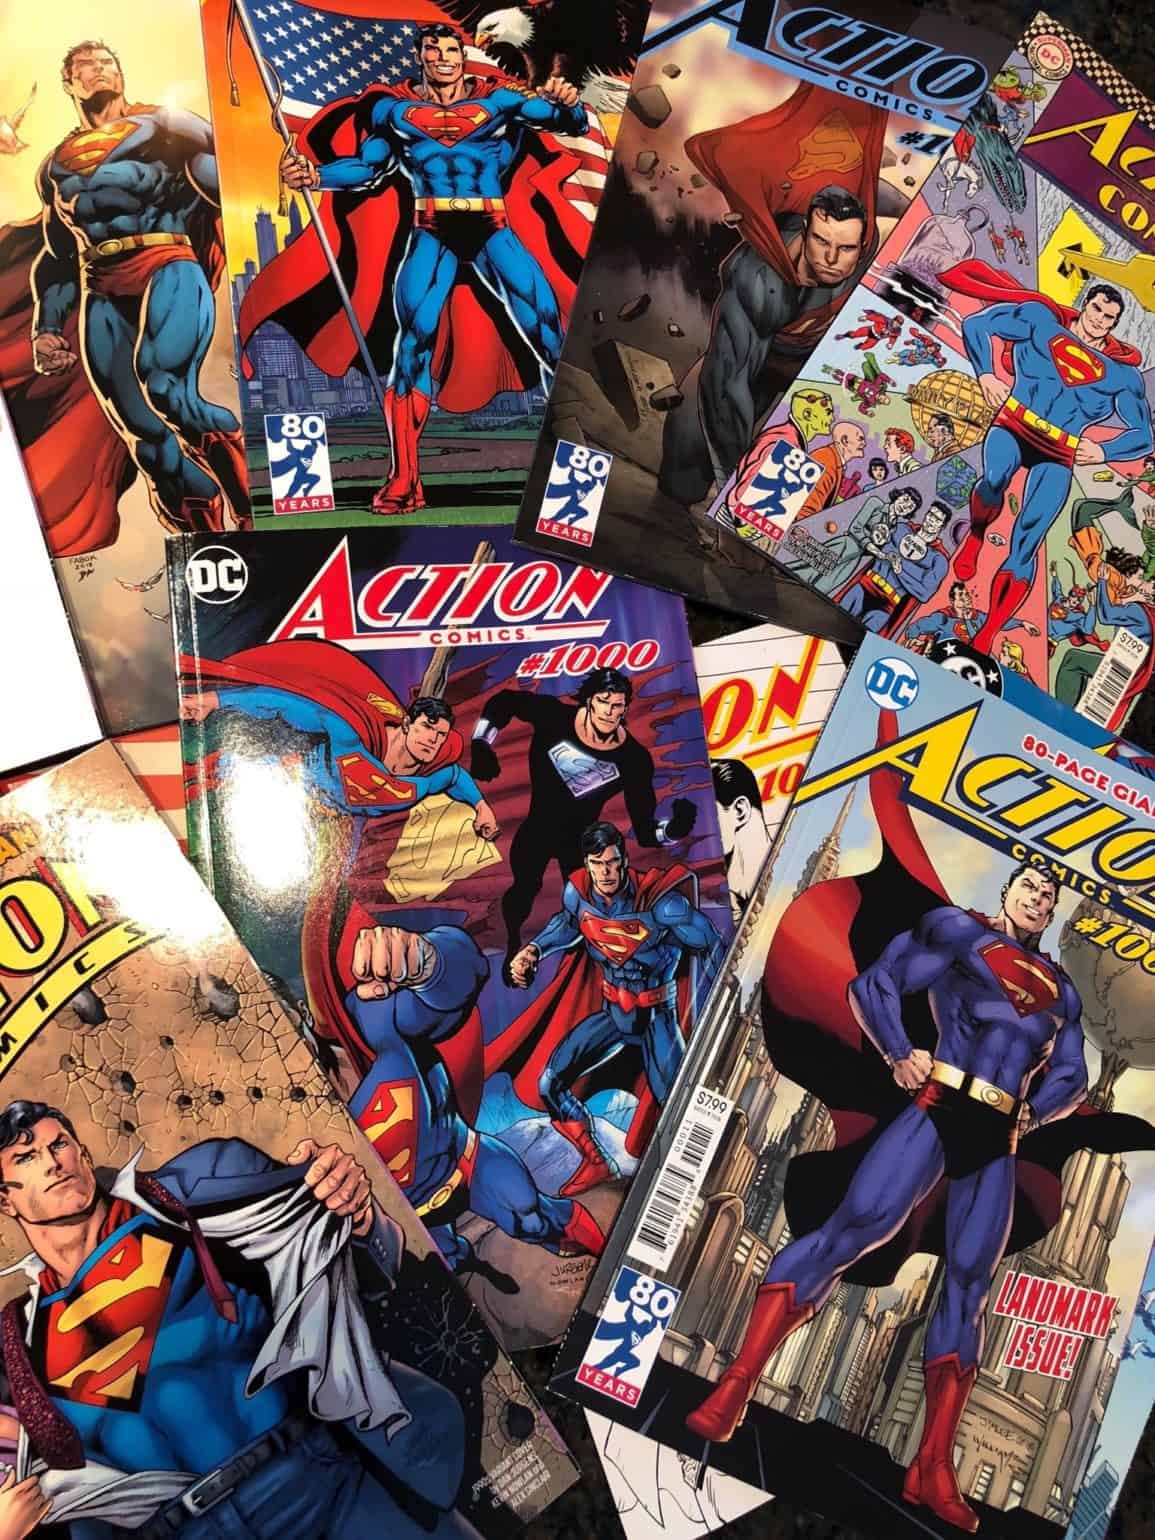 Action Comics 1000 covers